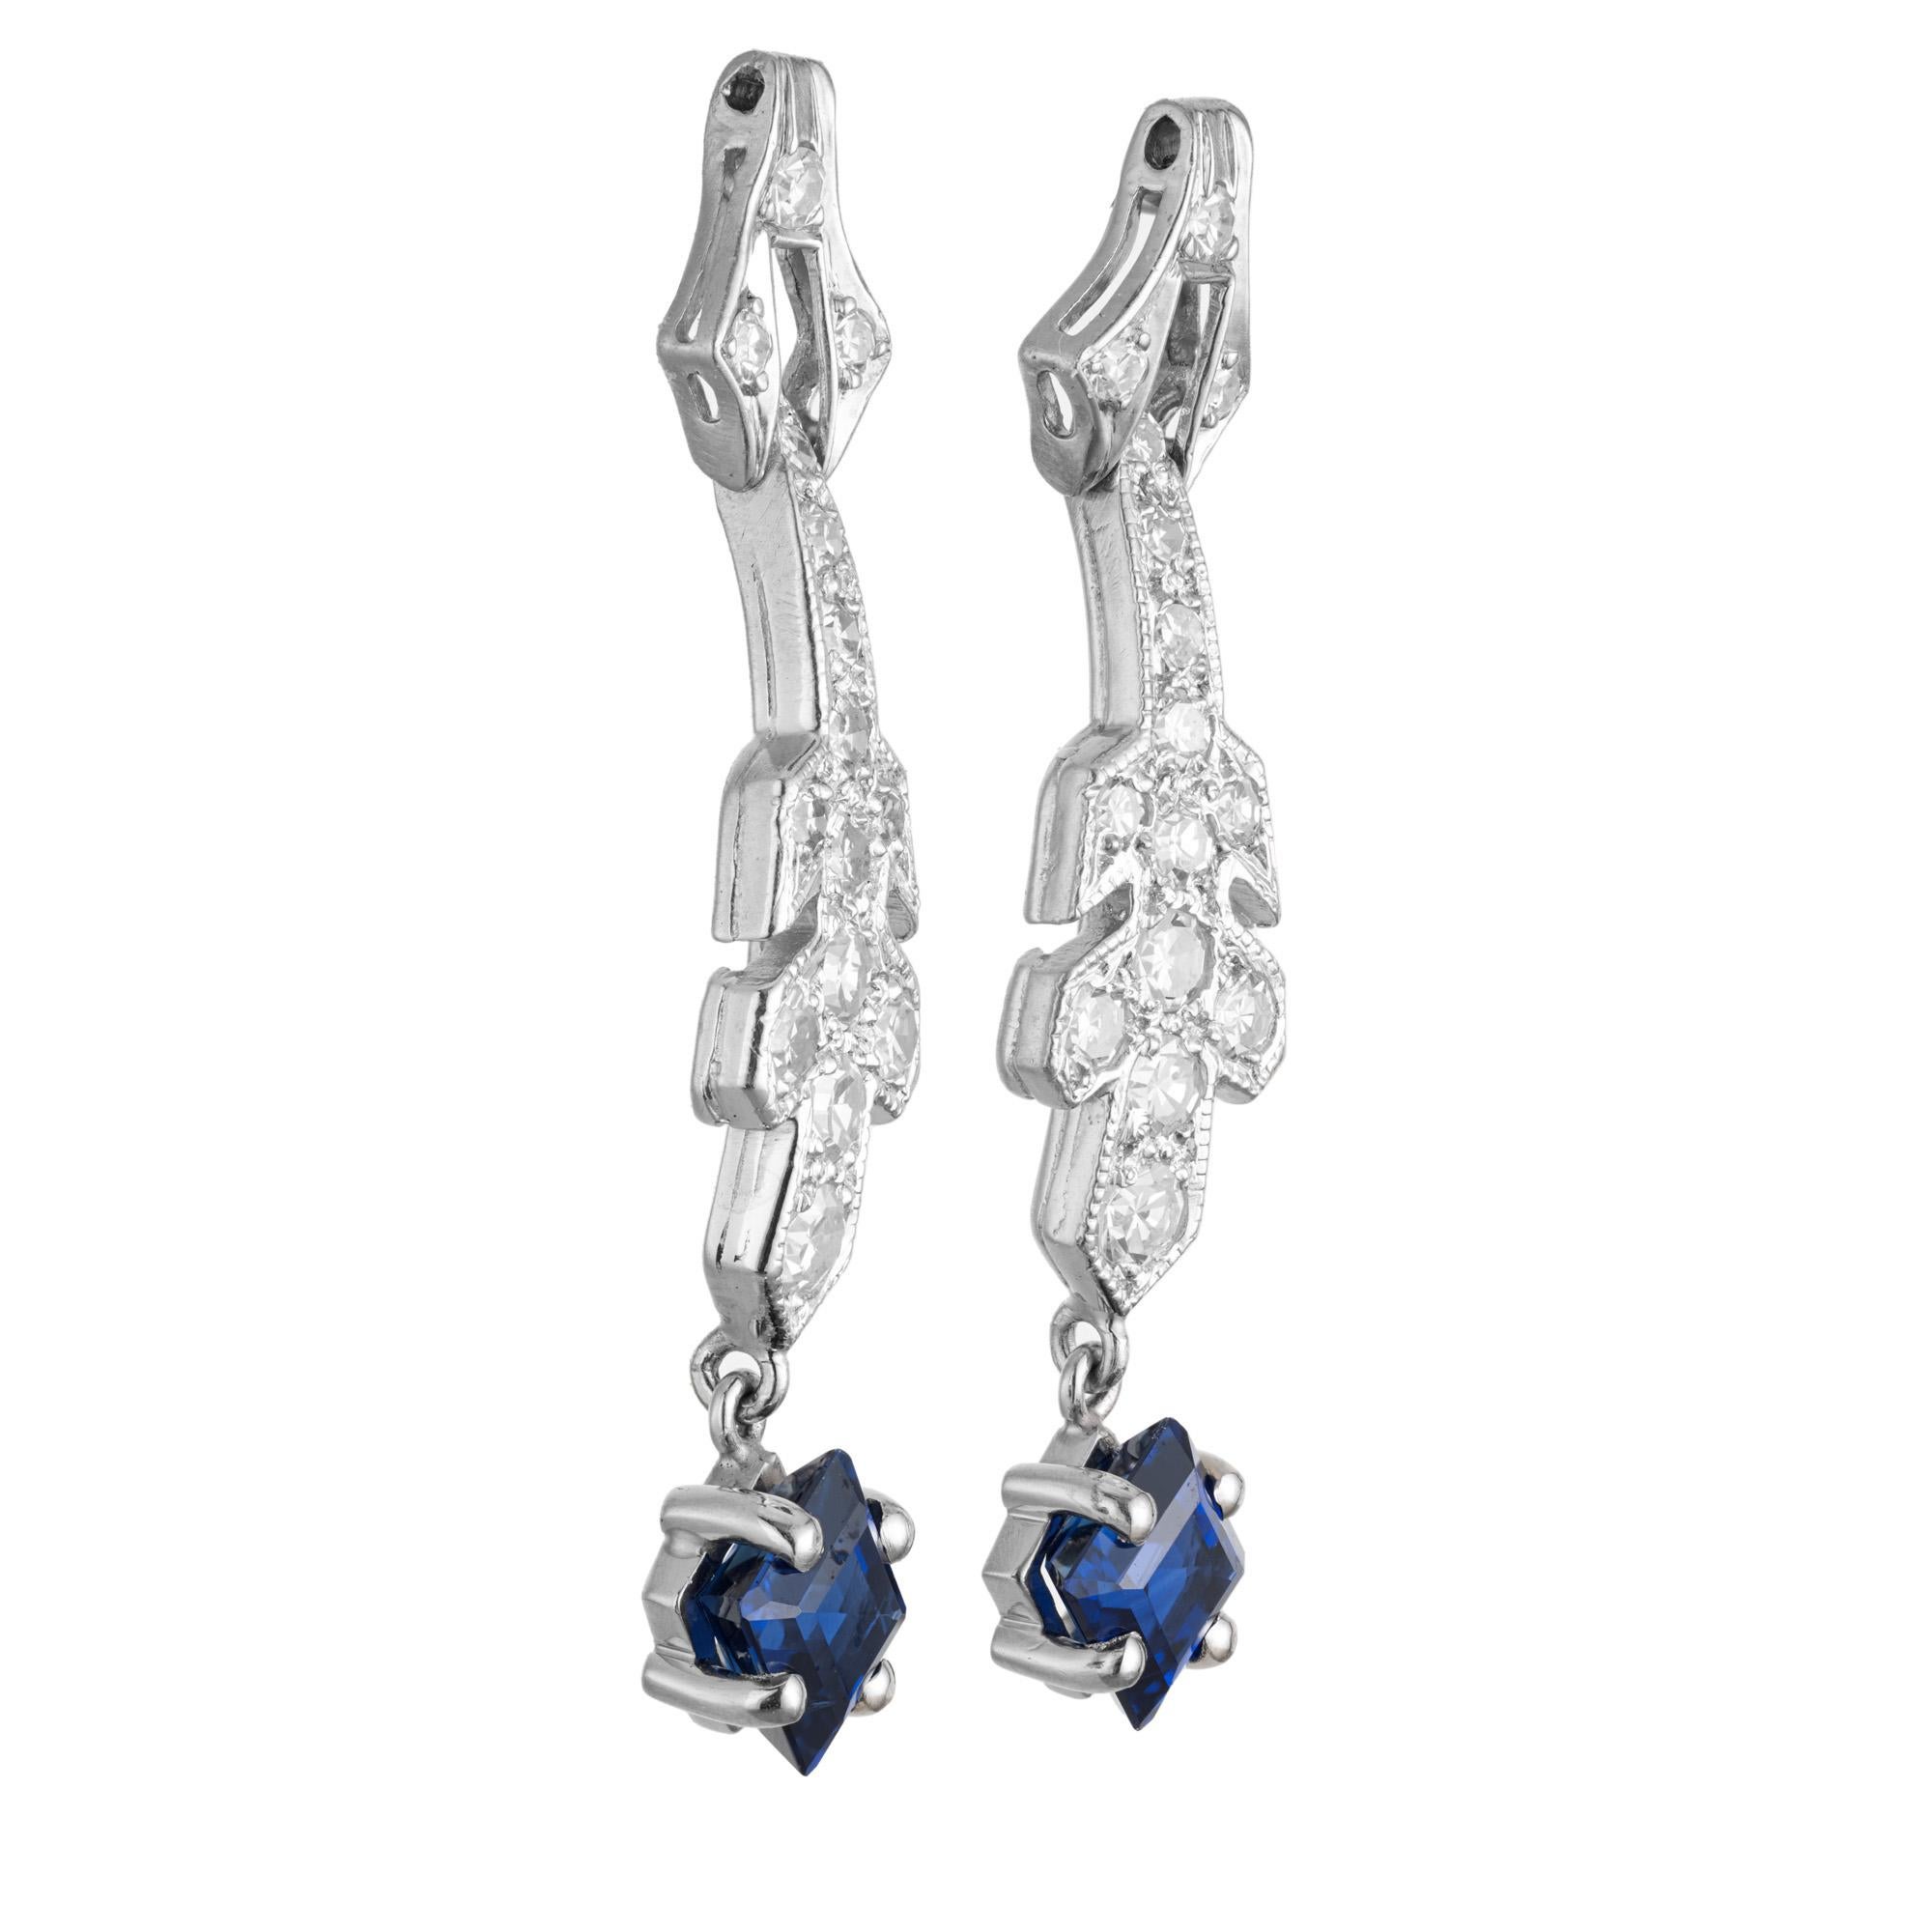 Art Deco sapphire and diamond dangle drop earrings. These 1920's dangle earrings are made up of 2 octagonal shape sapphires which sit at the base of two platinum settings that are adorned with 30 single cut diamonds. Both of the stones have